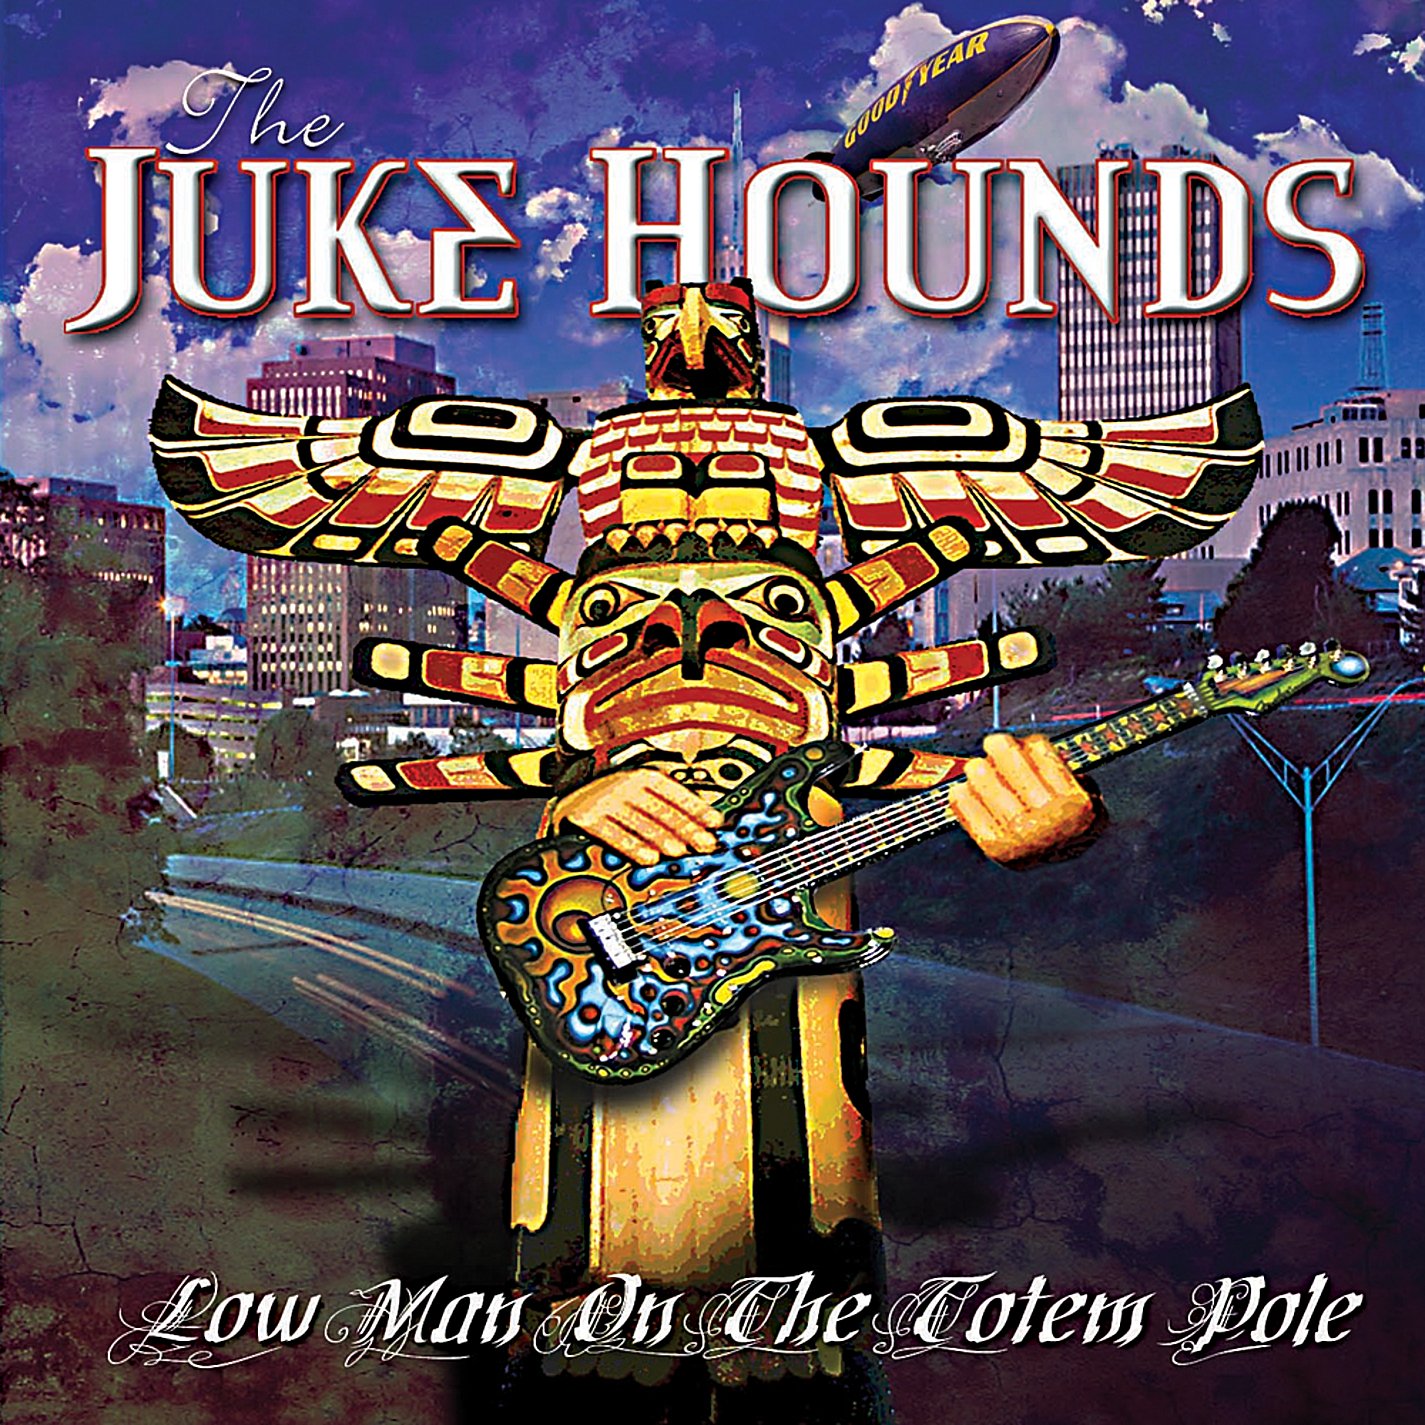 Art for Ohio by The Juke Hounds